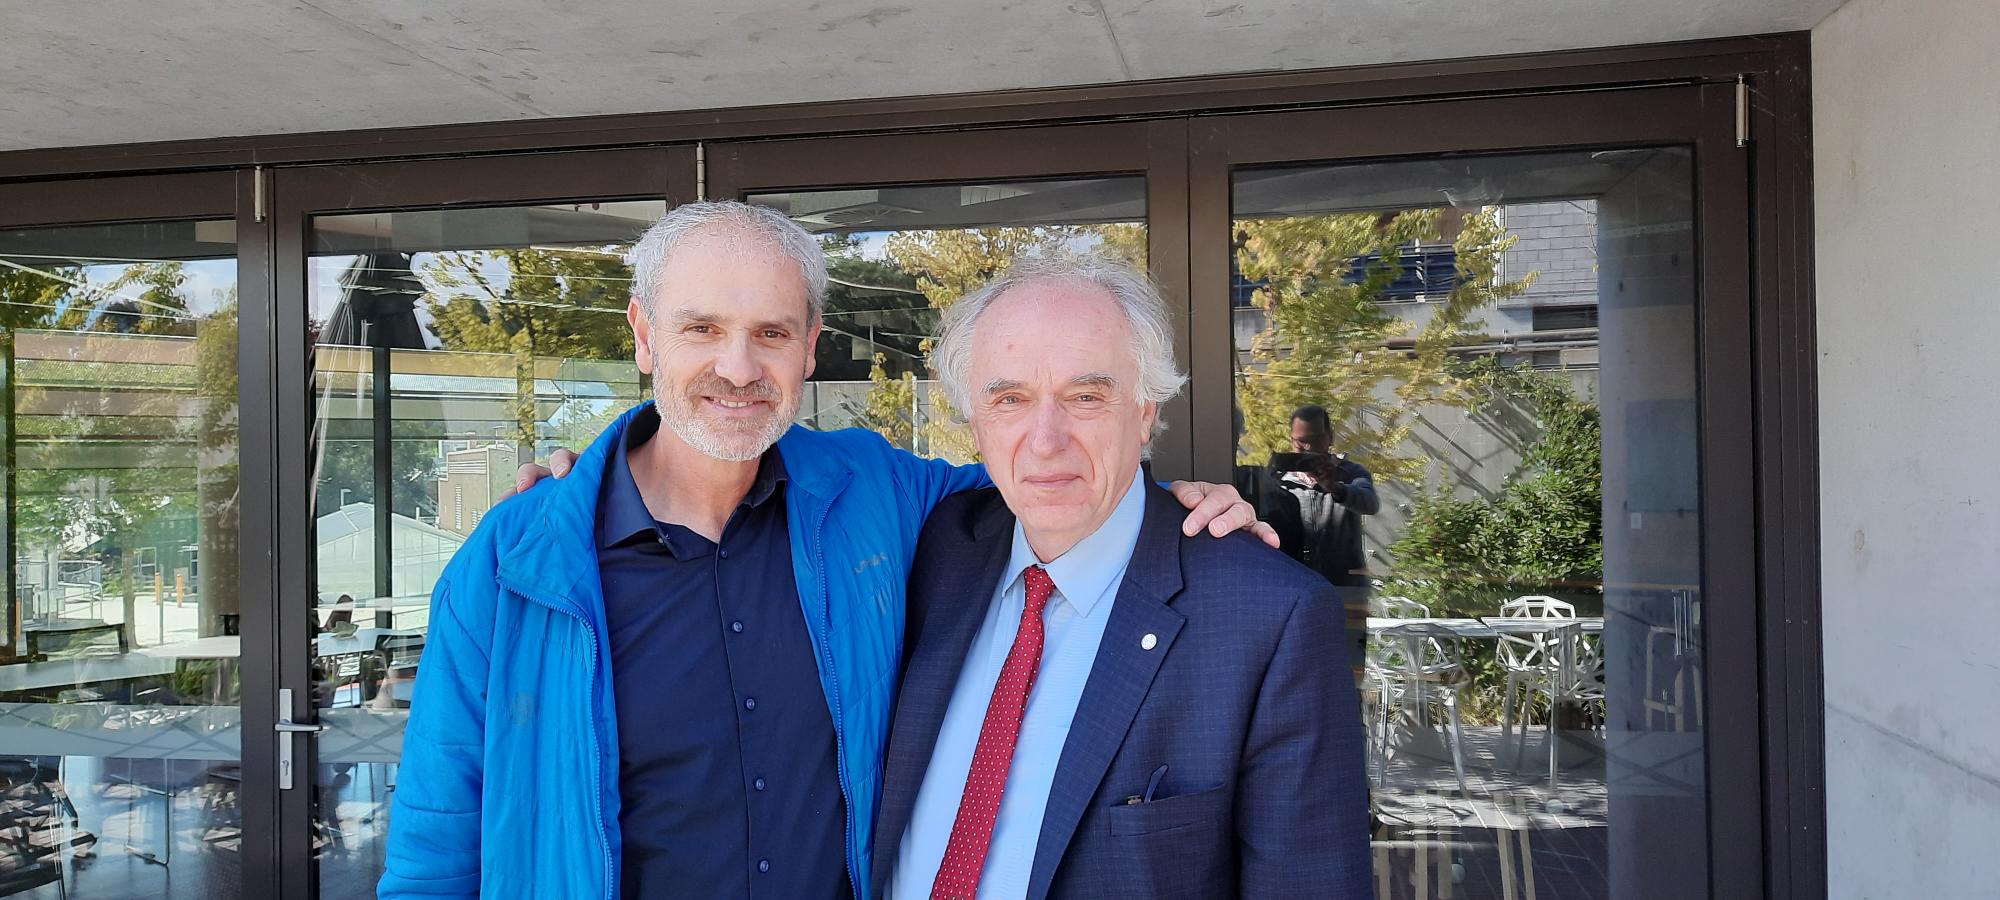 Pep Canadell, from the Global Carbon Project (GCP), and Pavel Kabat, Secretary General of HFSP, in Canberra, Australia.